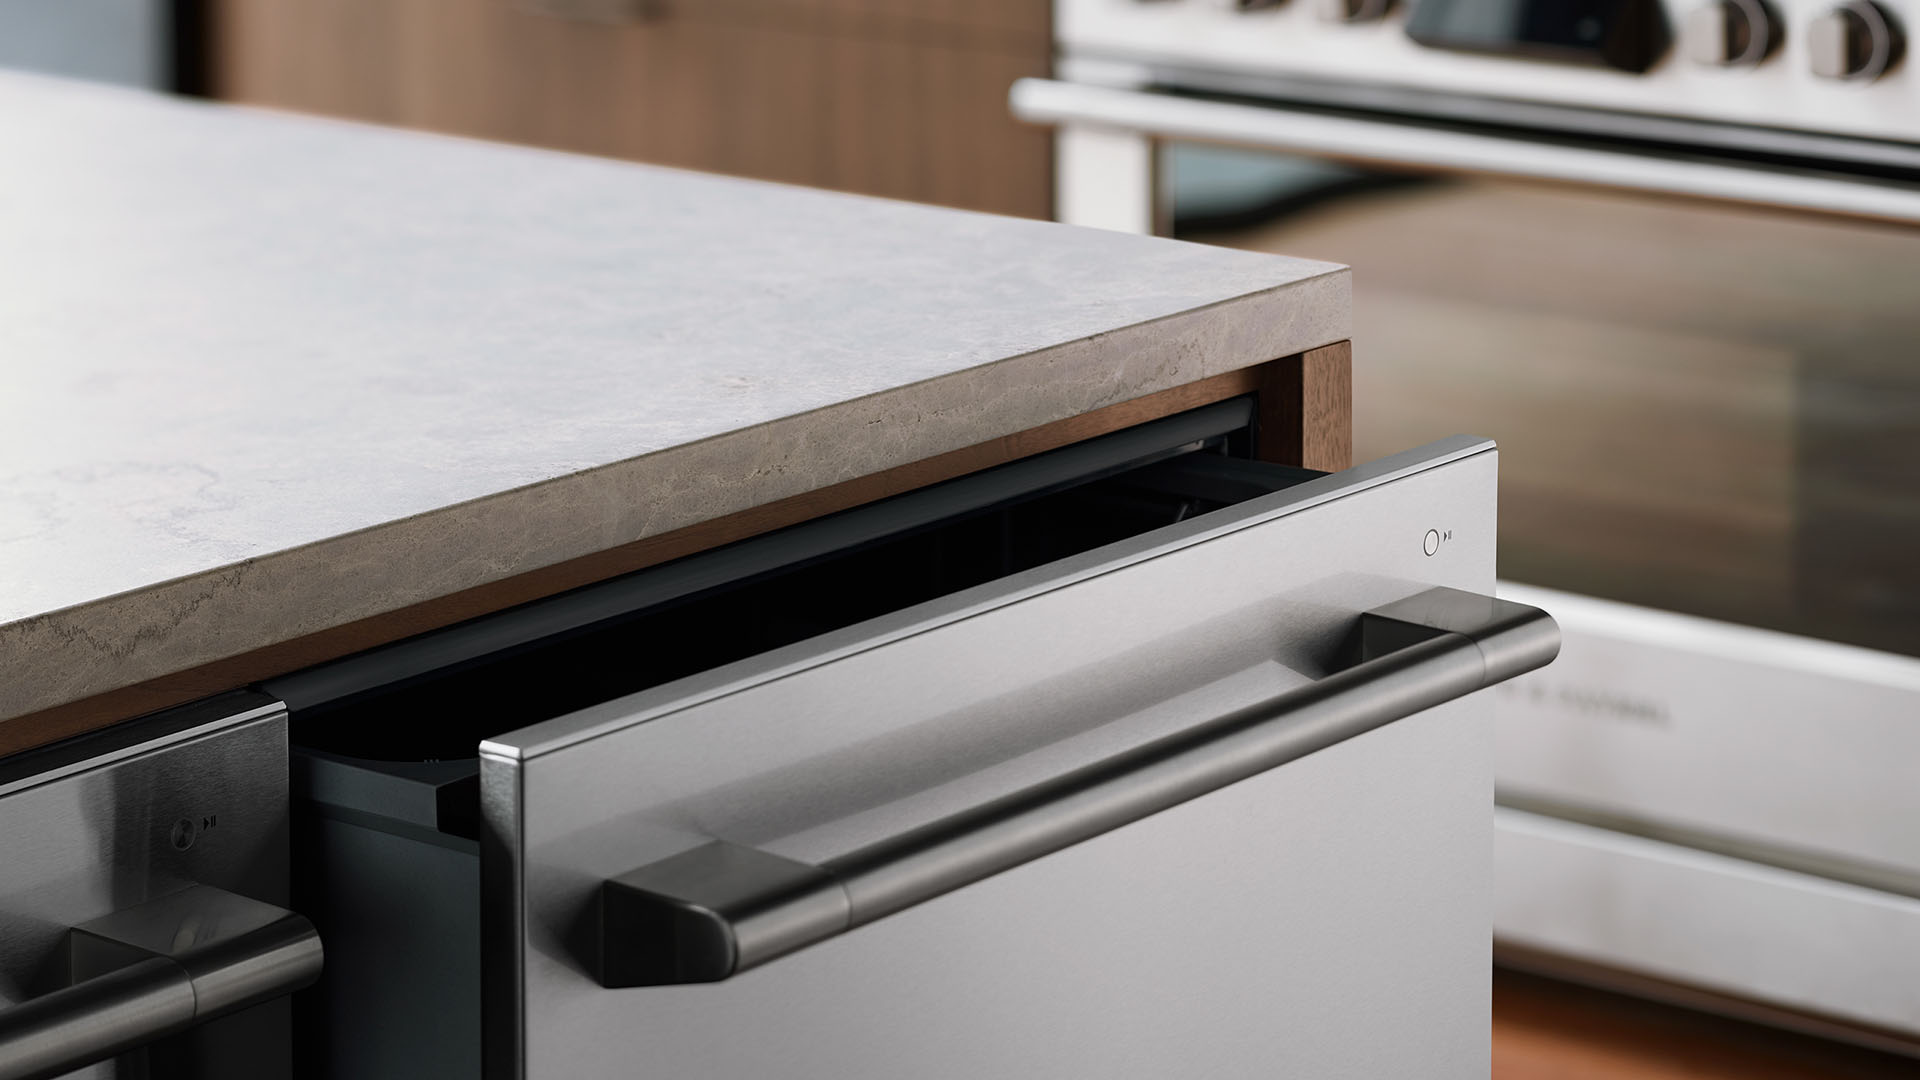 Shot of the Contemporary-style Dishwasher with the drawer ajar